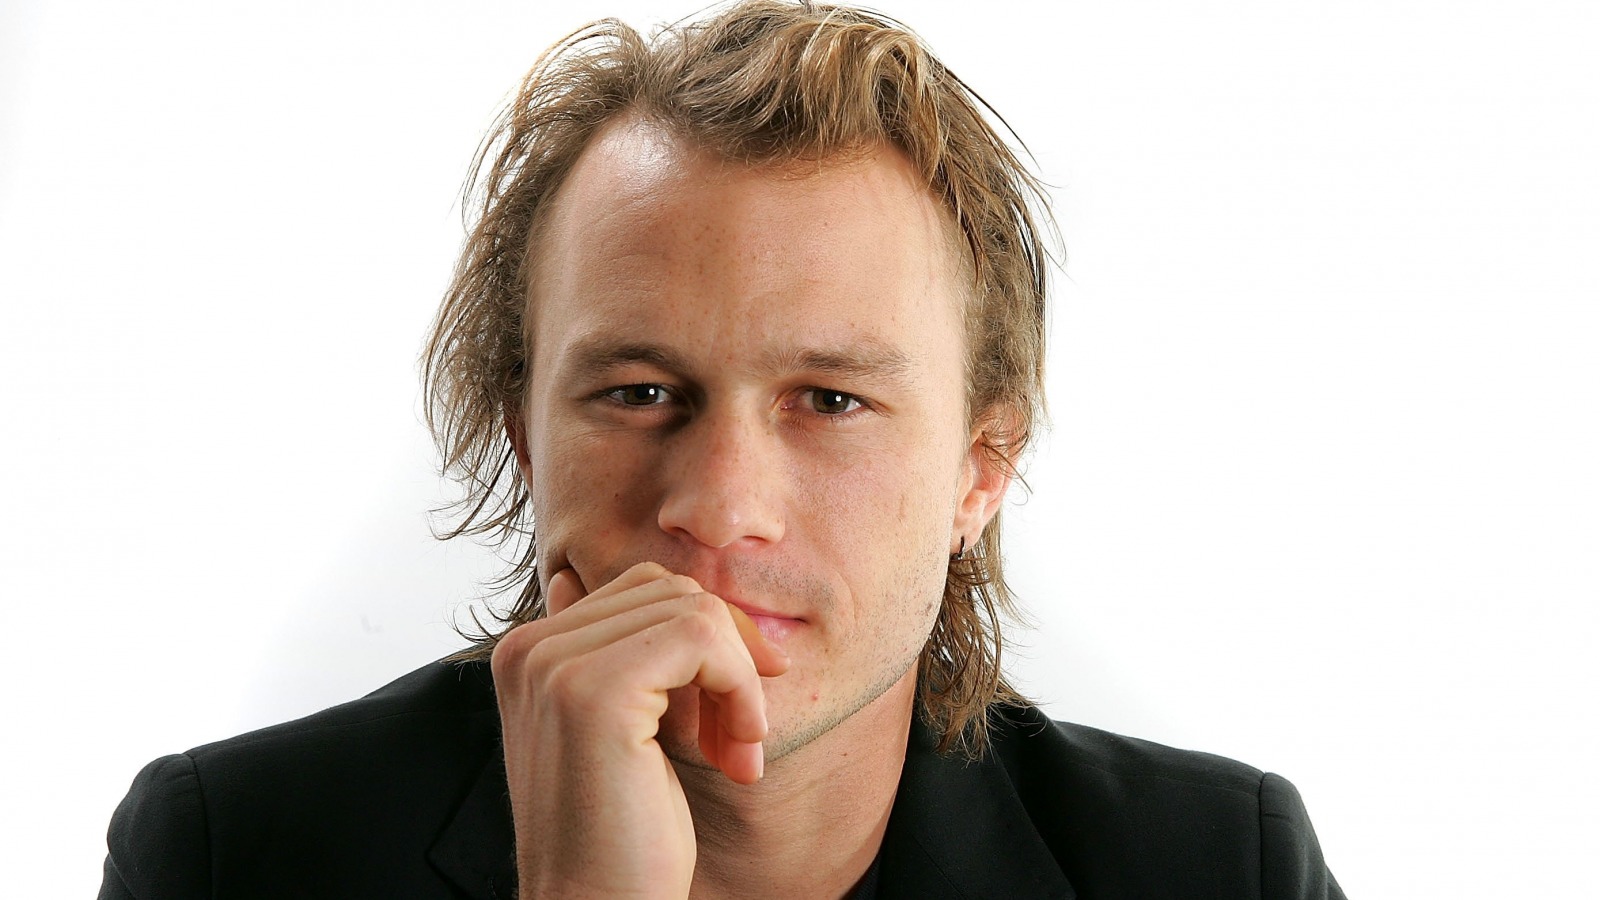 Netflix's The Queen's Gambit Has A Tragic Connection To Heath Ledger